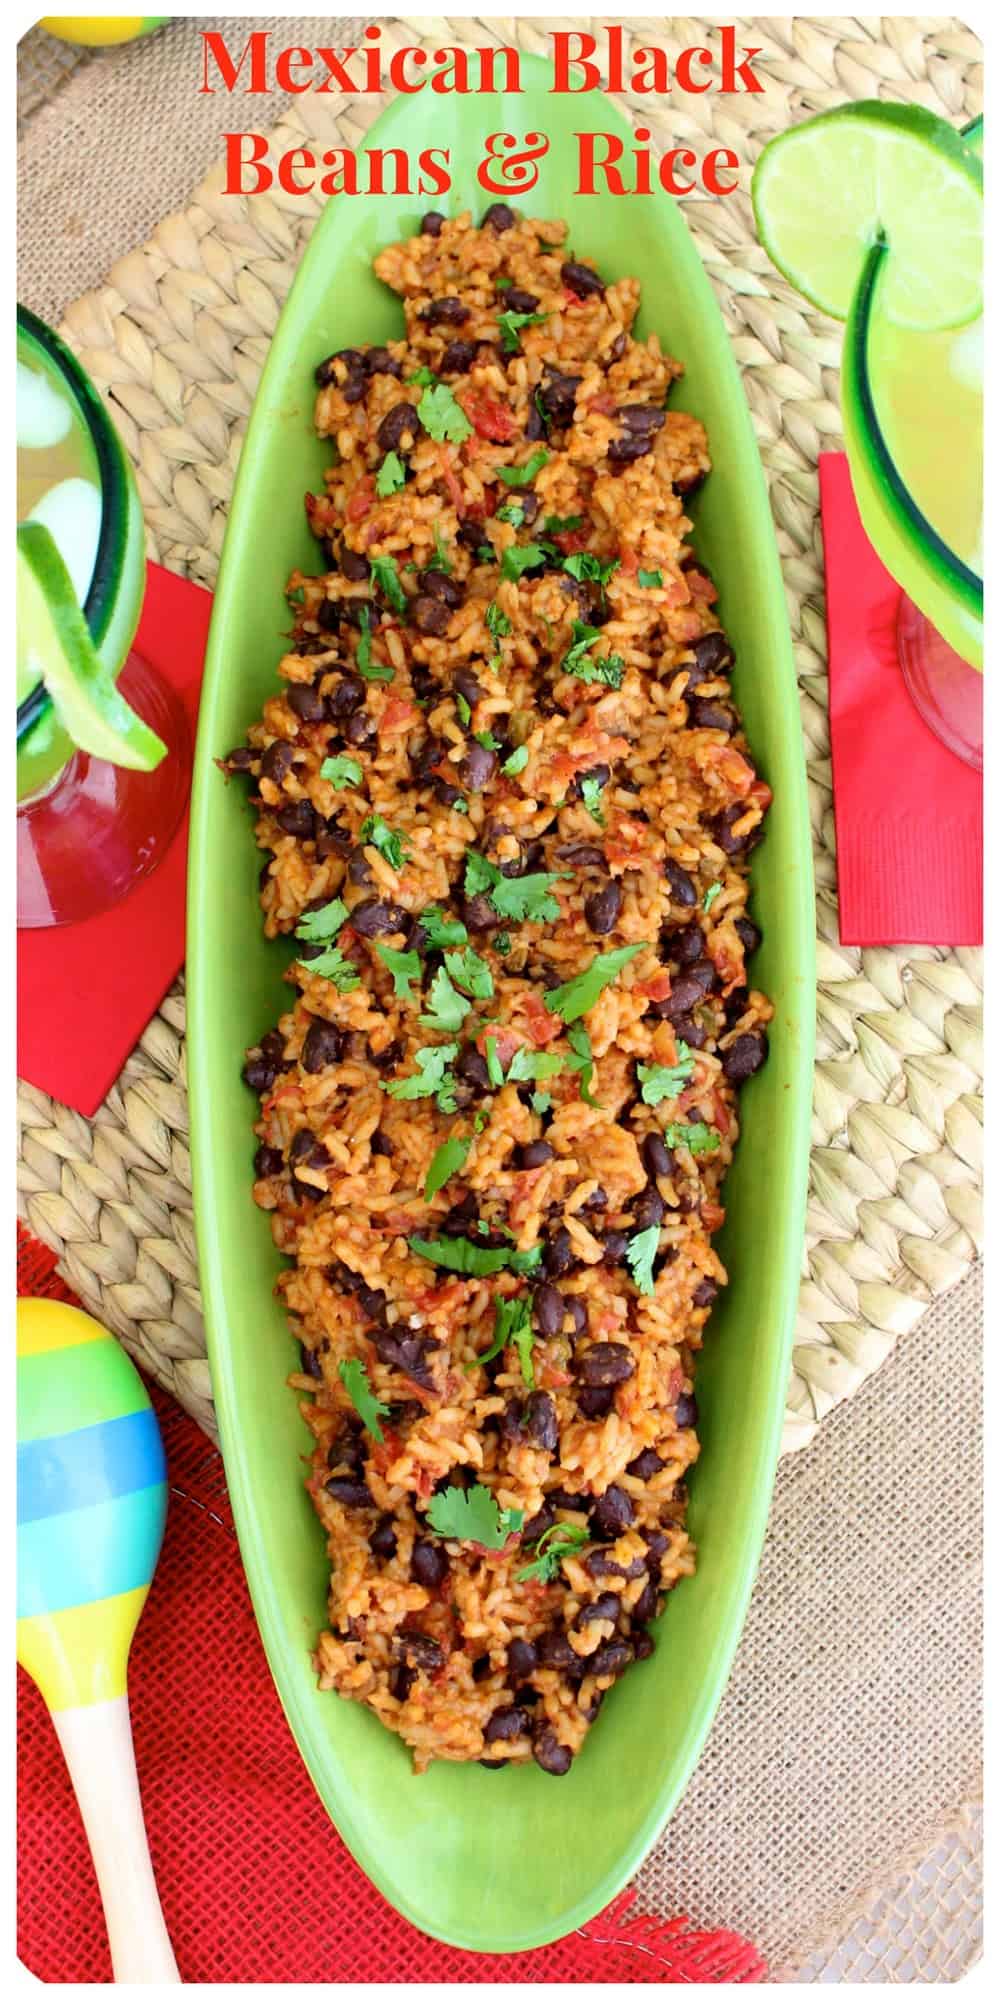 Mexican Black Beans & Rice | The BakerMama